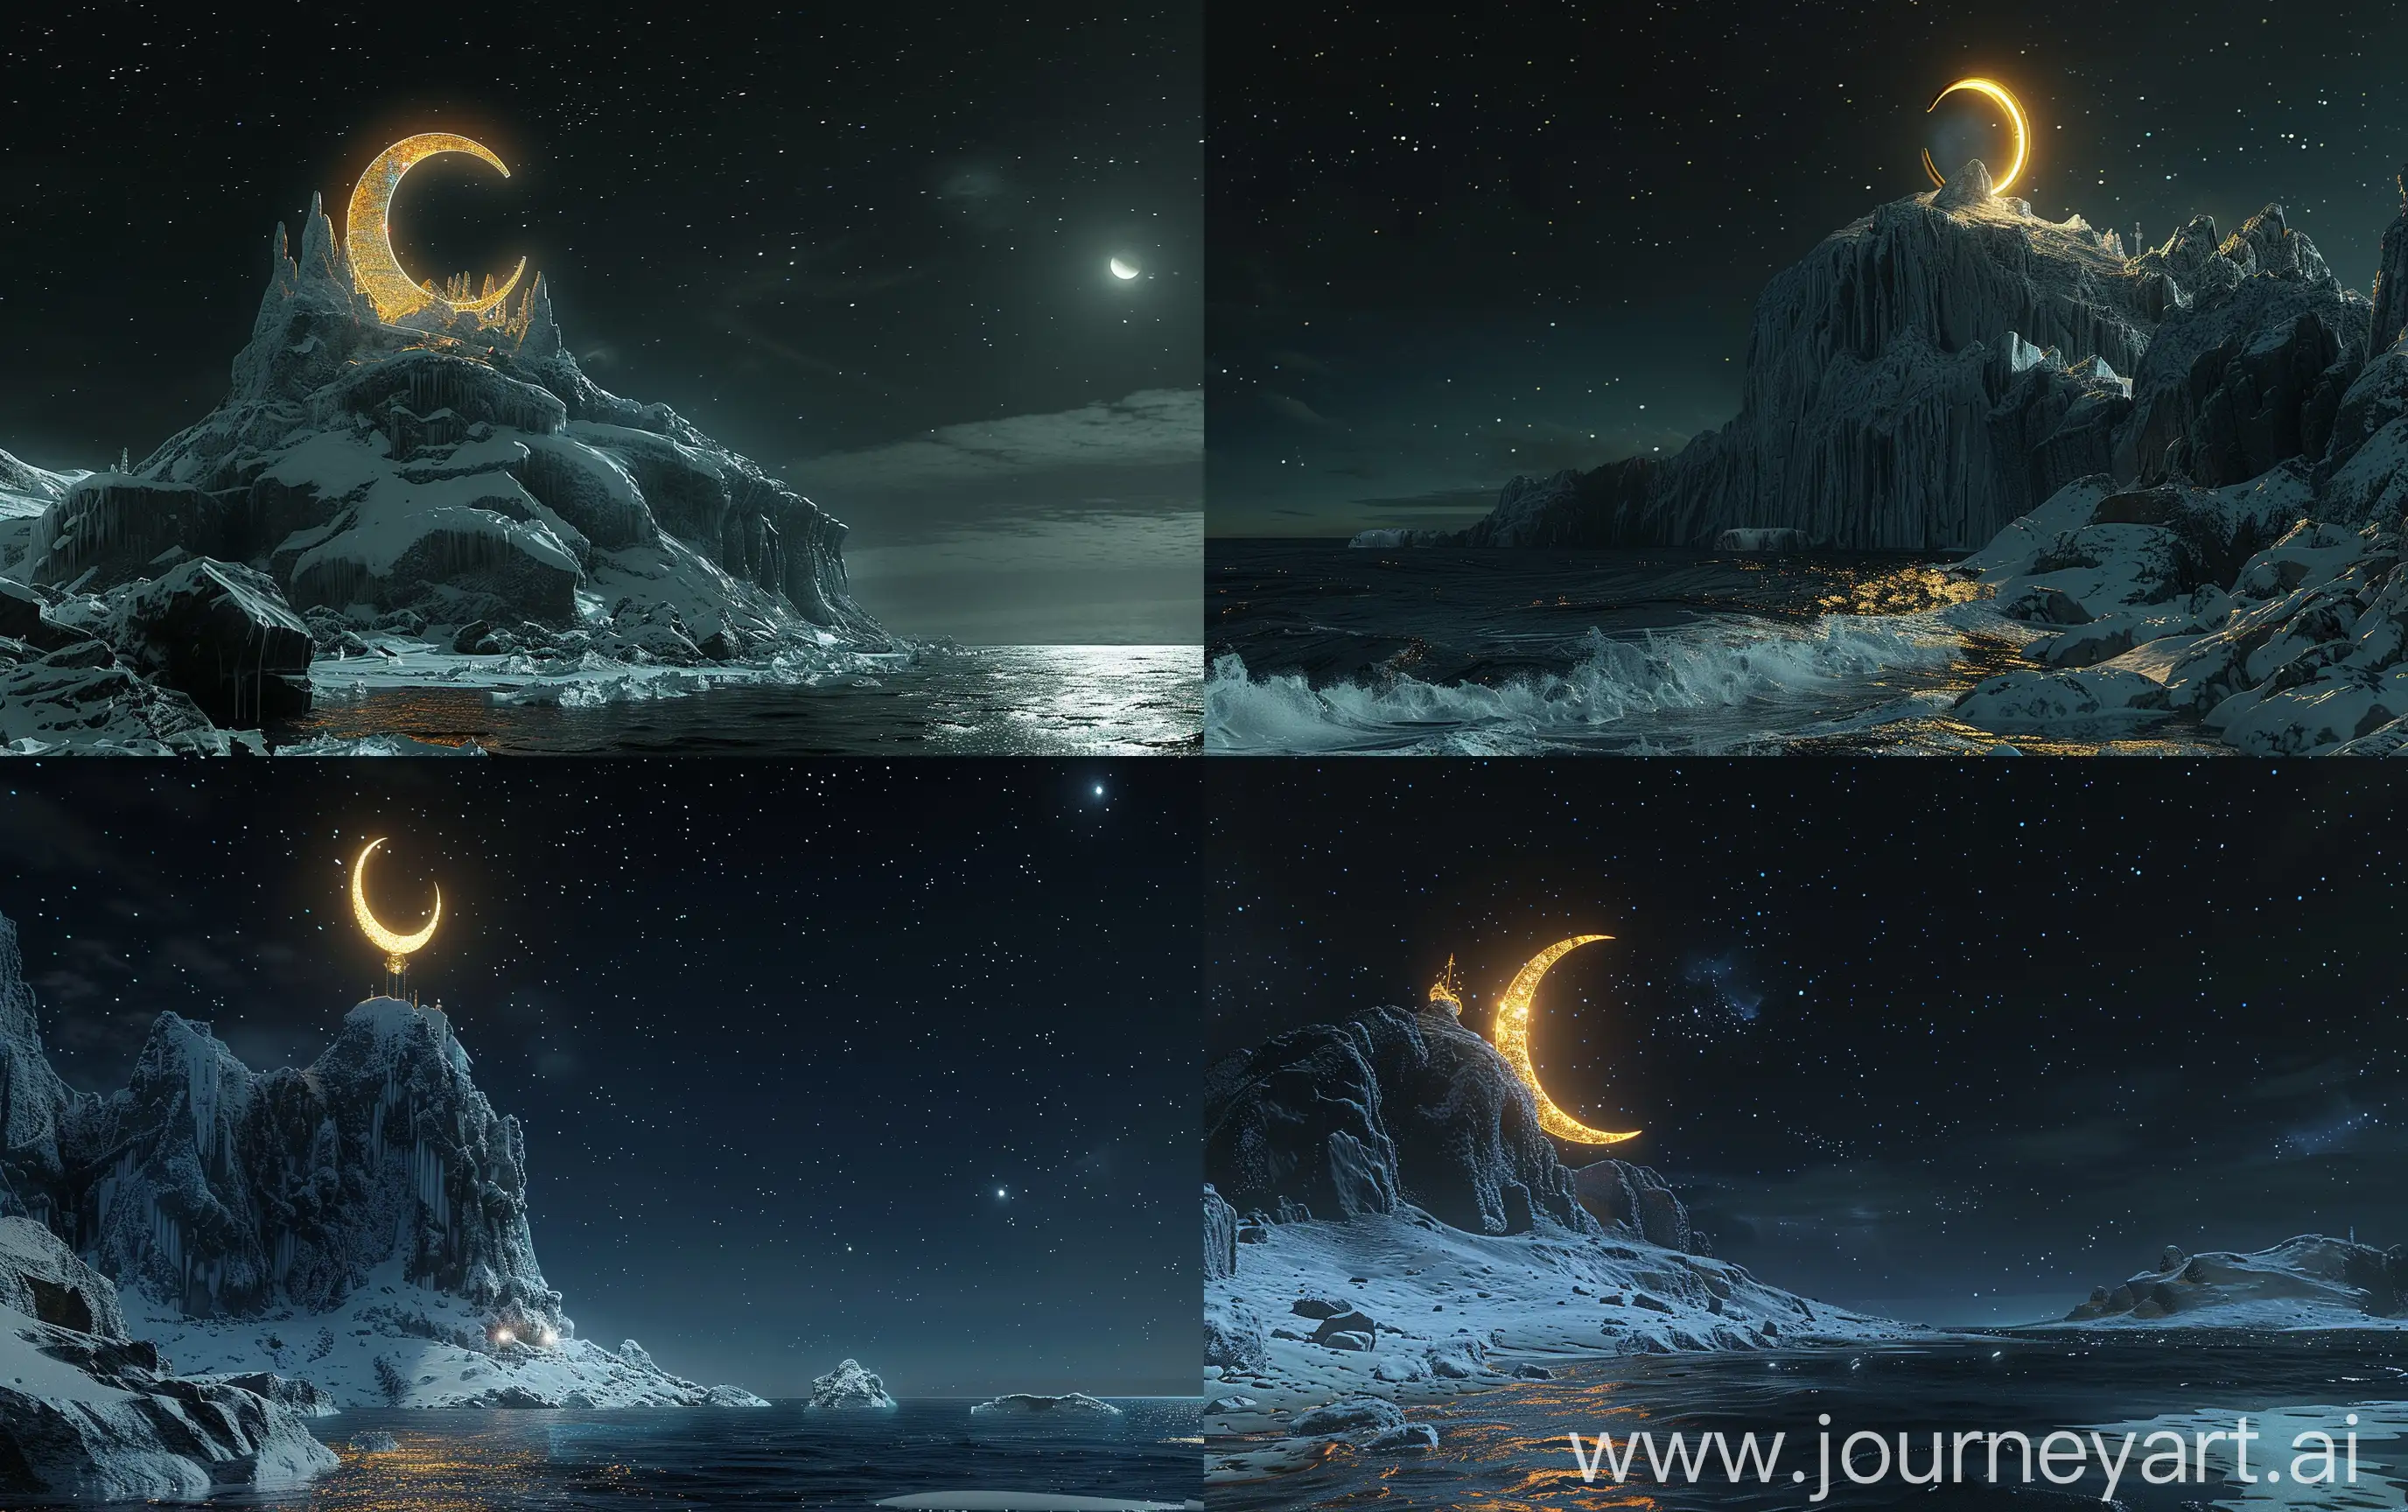 Glowing-Golden-Crescent-Statue-atop-Snowy-Mountain